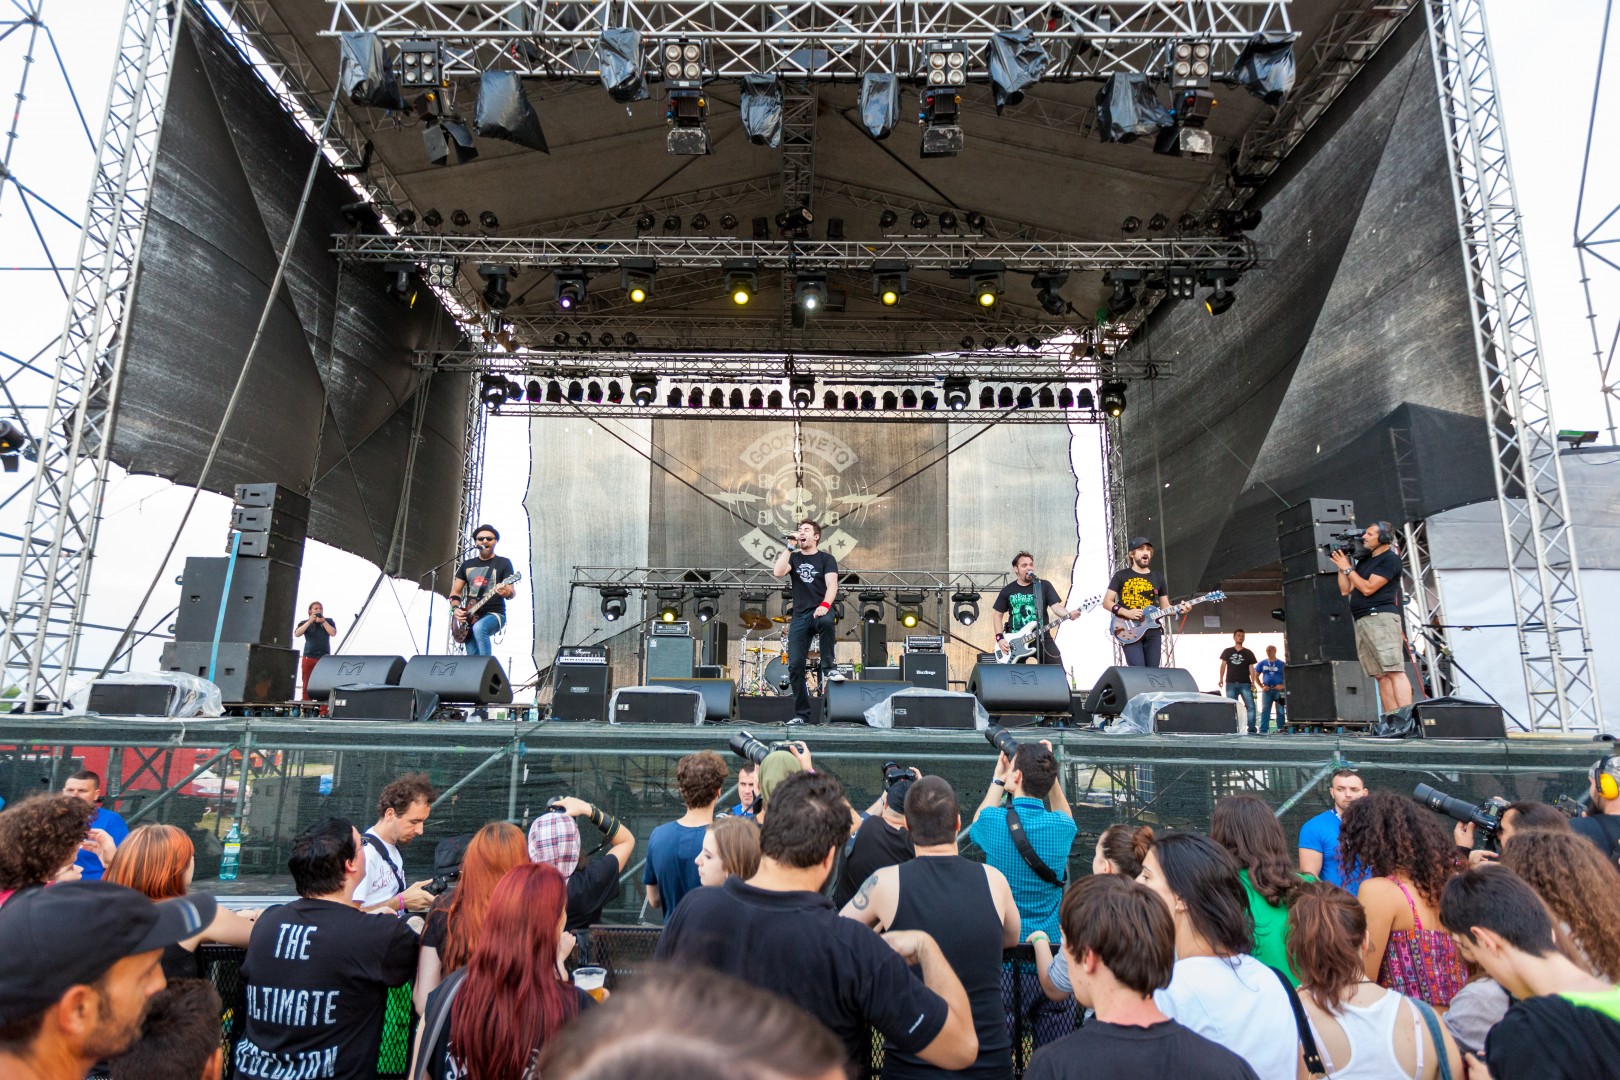 Goodbye To Gravity at B'Estfest Park in Tunari on July 7, 2013 (d672d8660c)